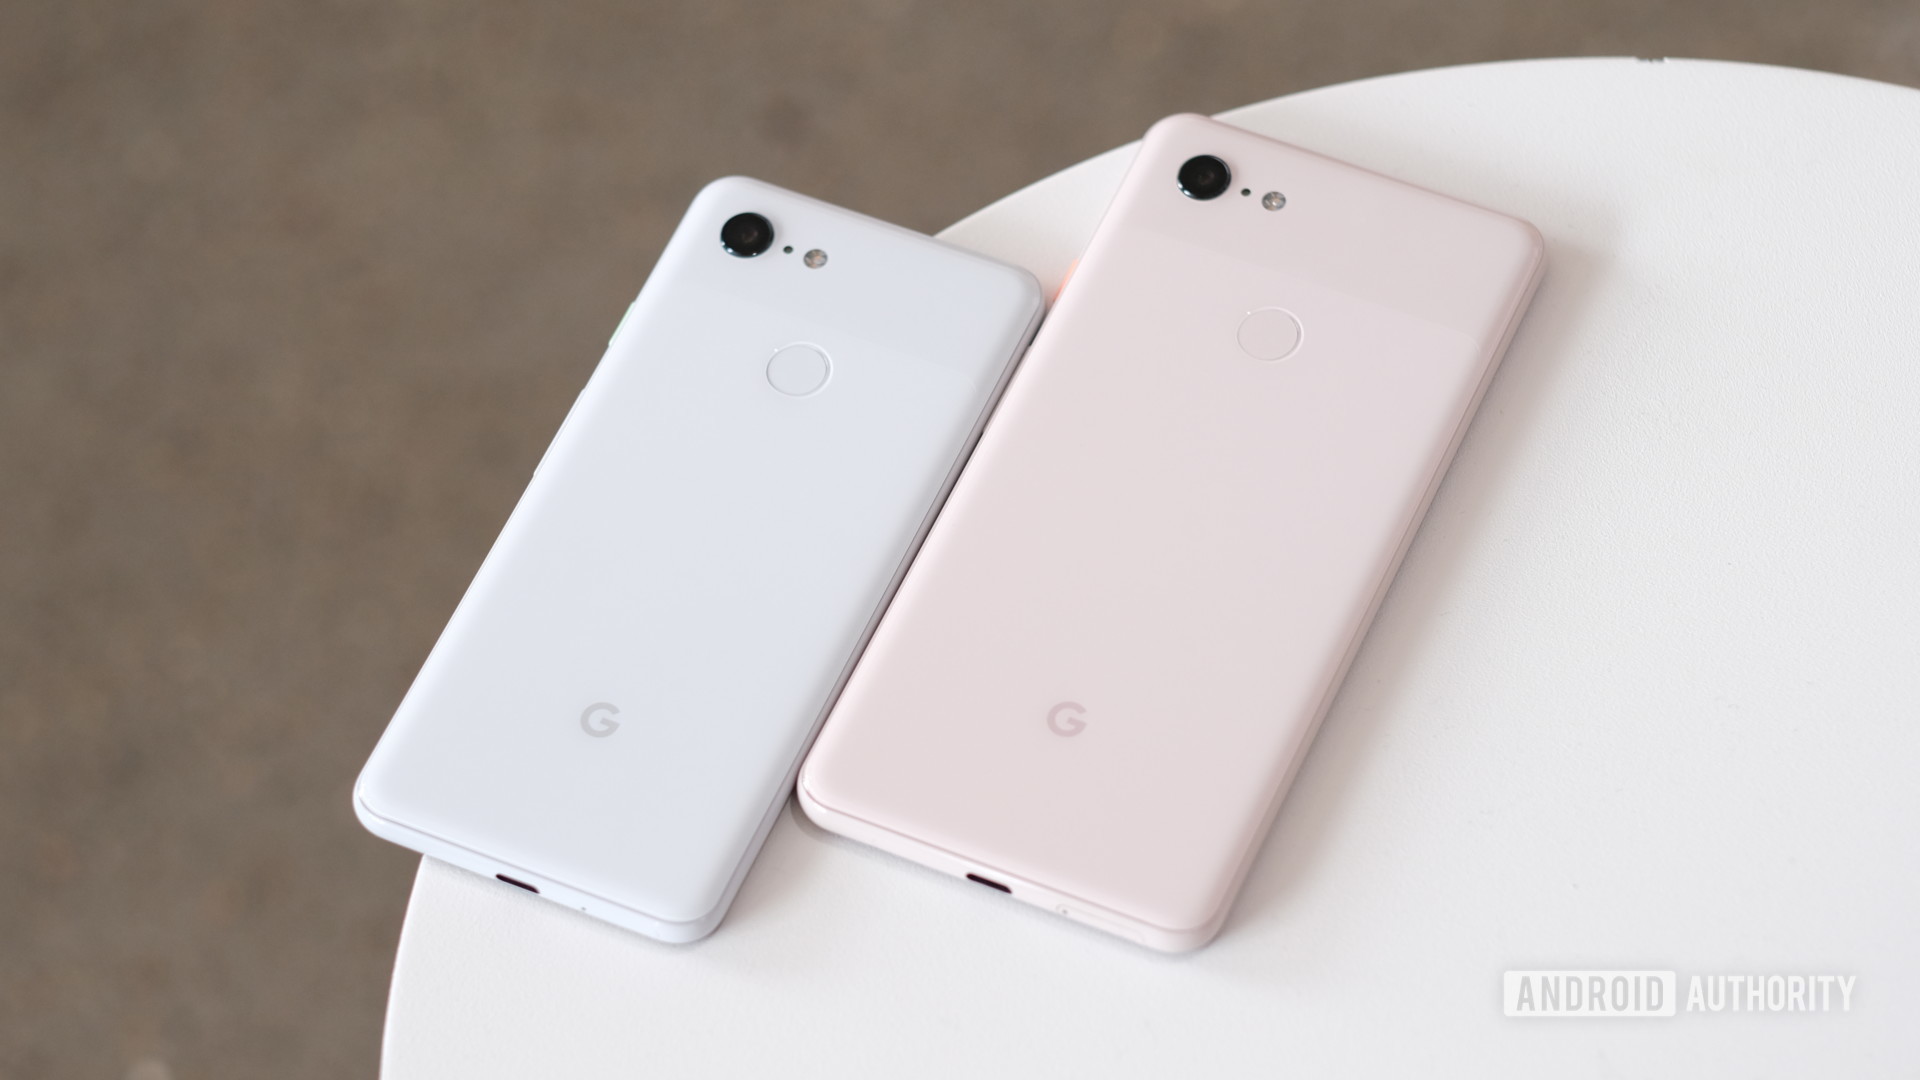 Google Pixel 3: A Testament to Google’s Smartphone Prowess